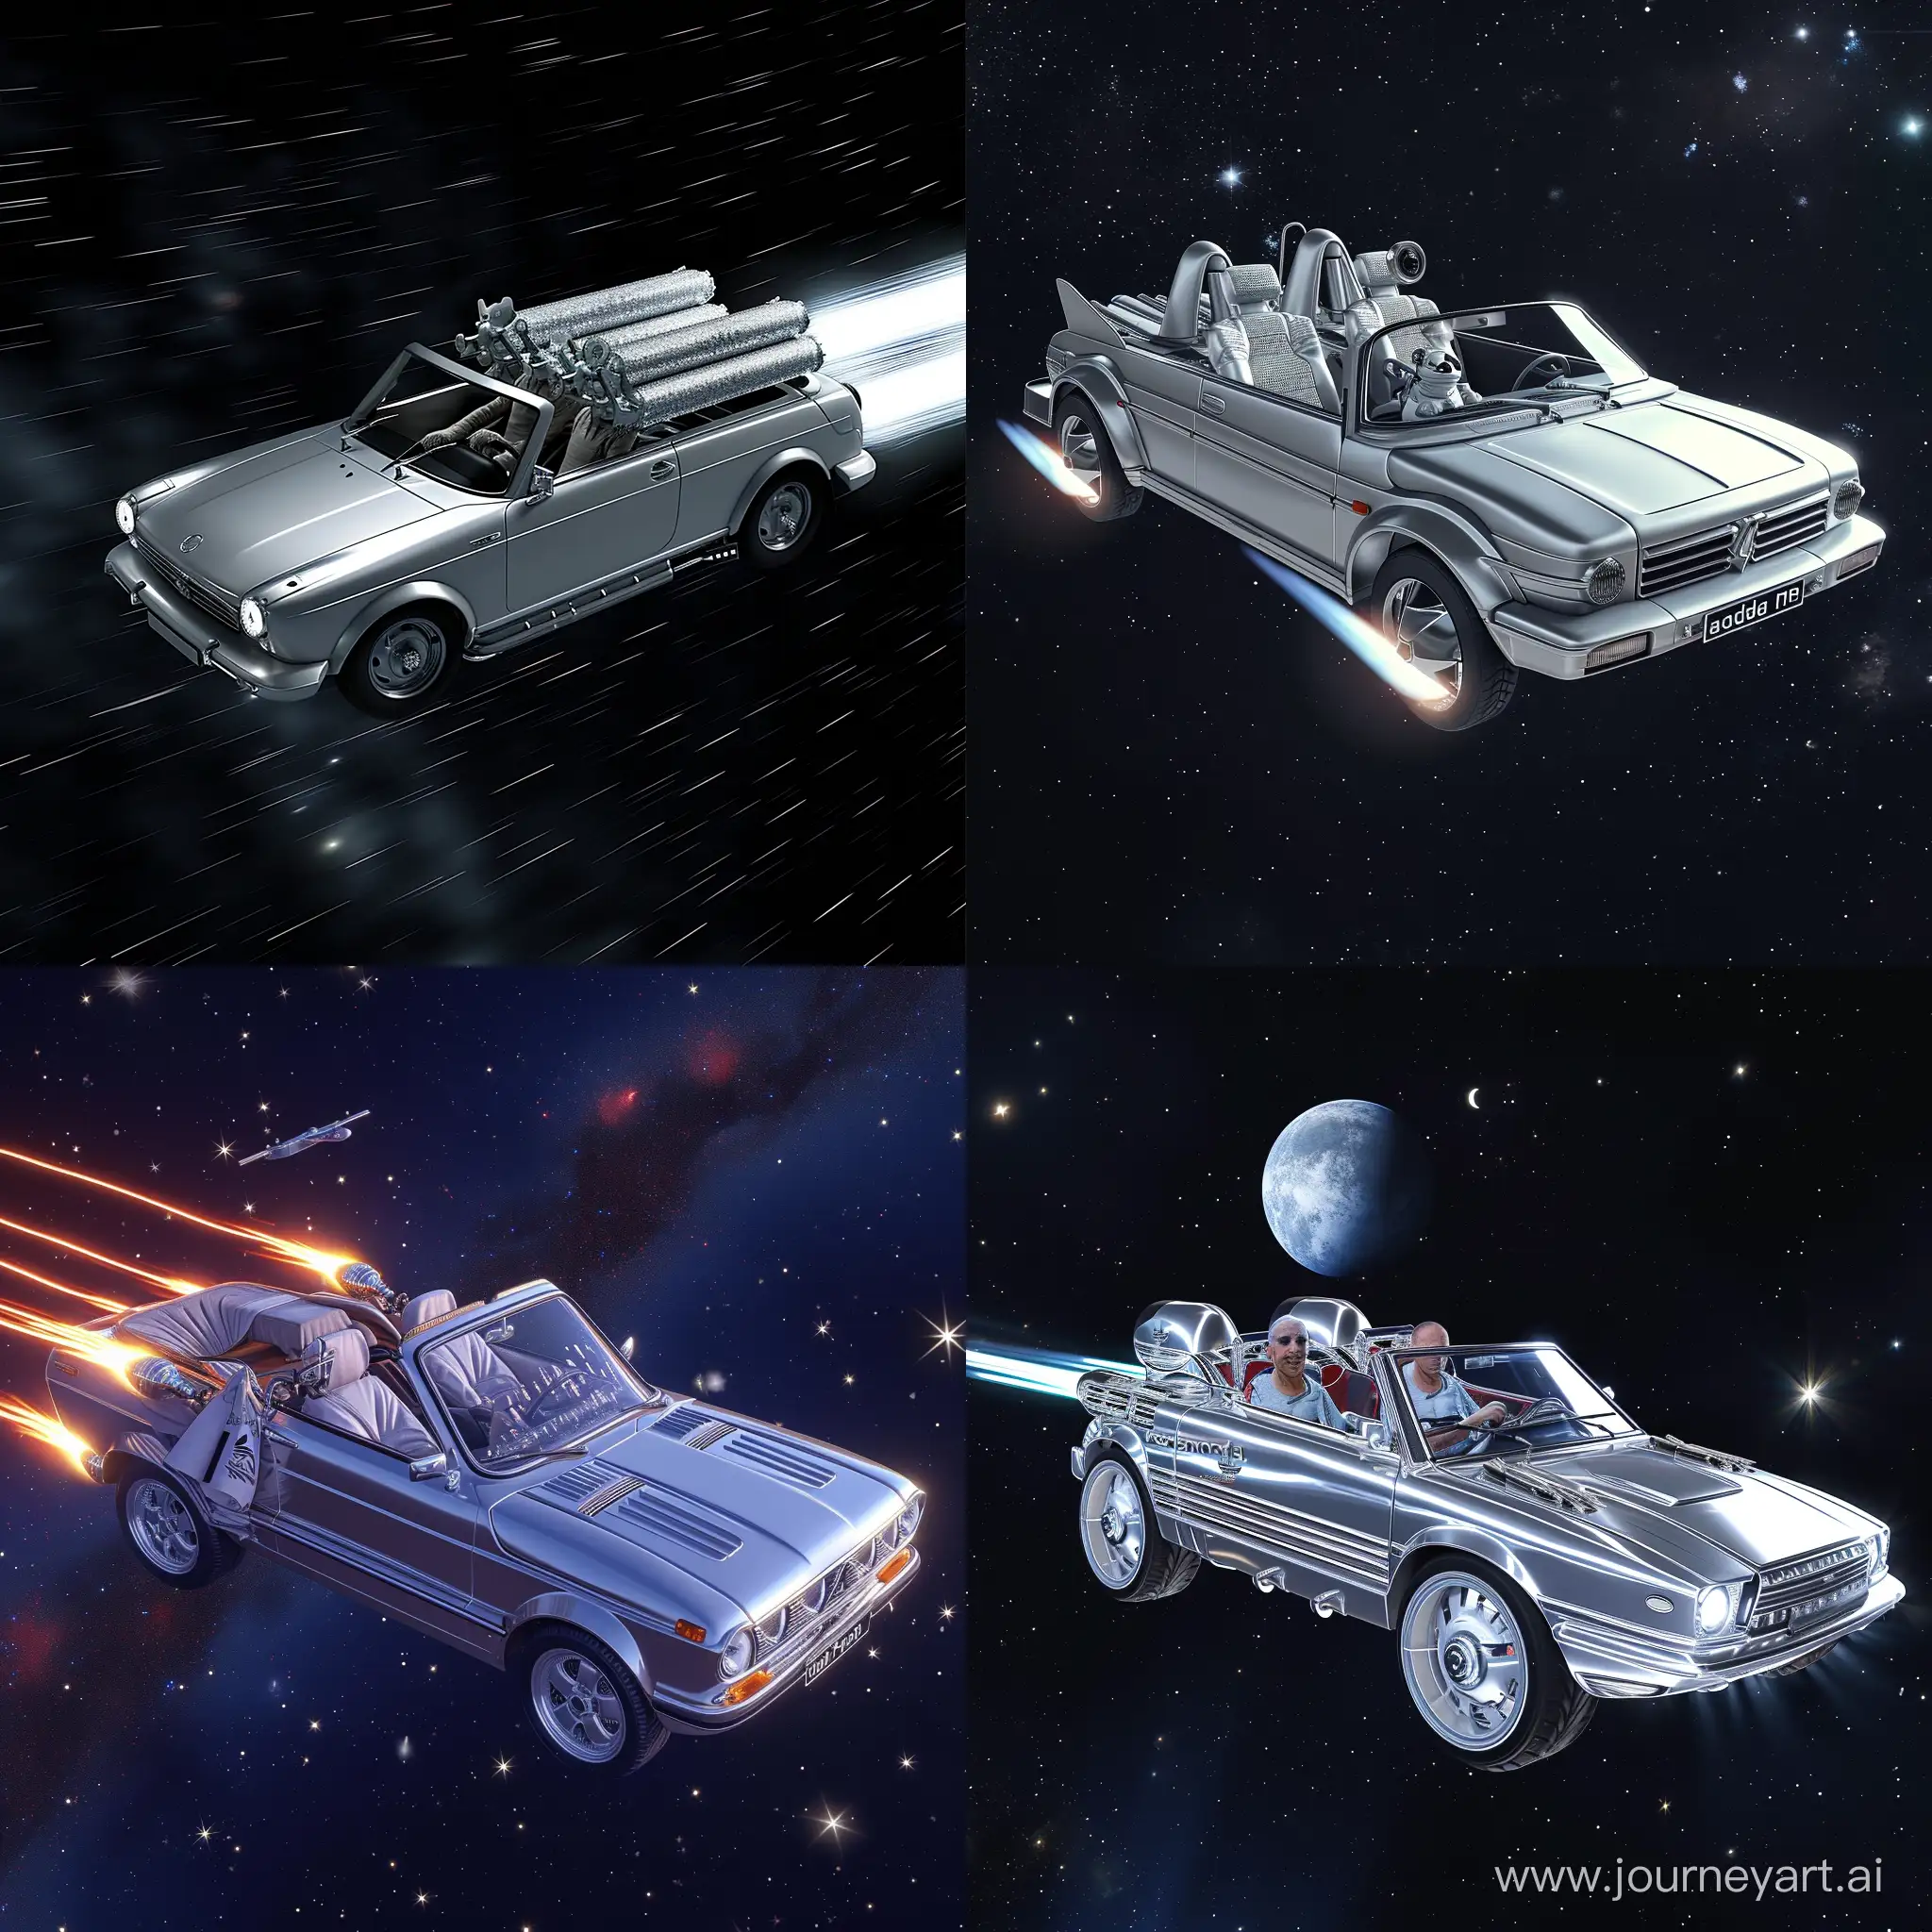 Flying-Silver-Lada-Priora-Cabrio-with-Gopnik-in-Adidas-in-Space